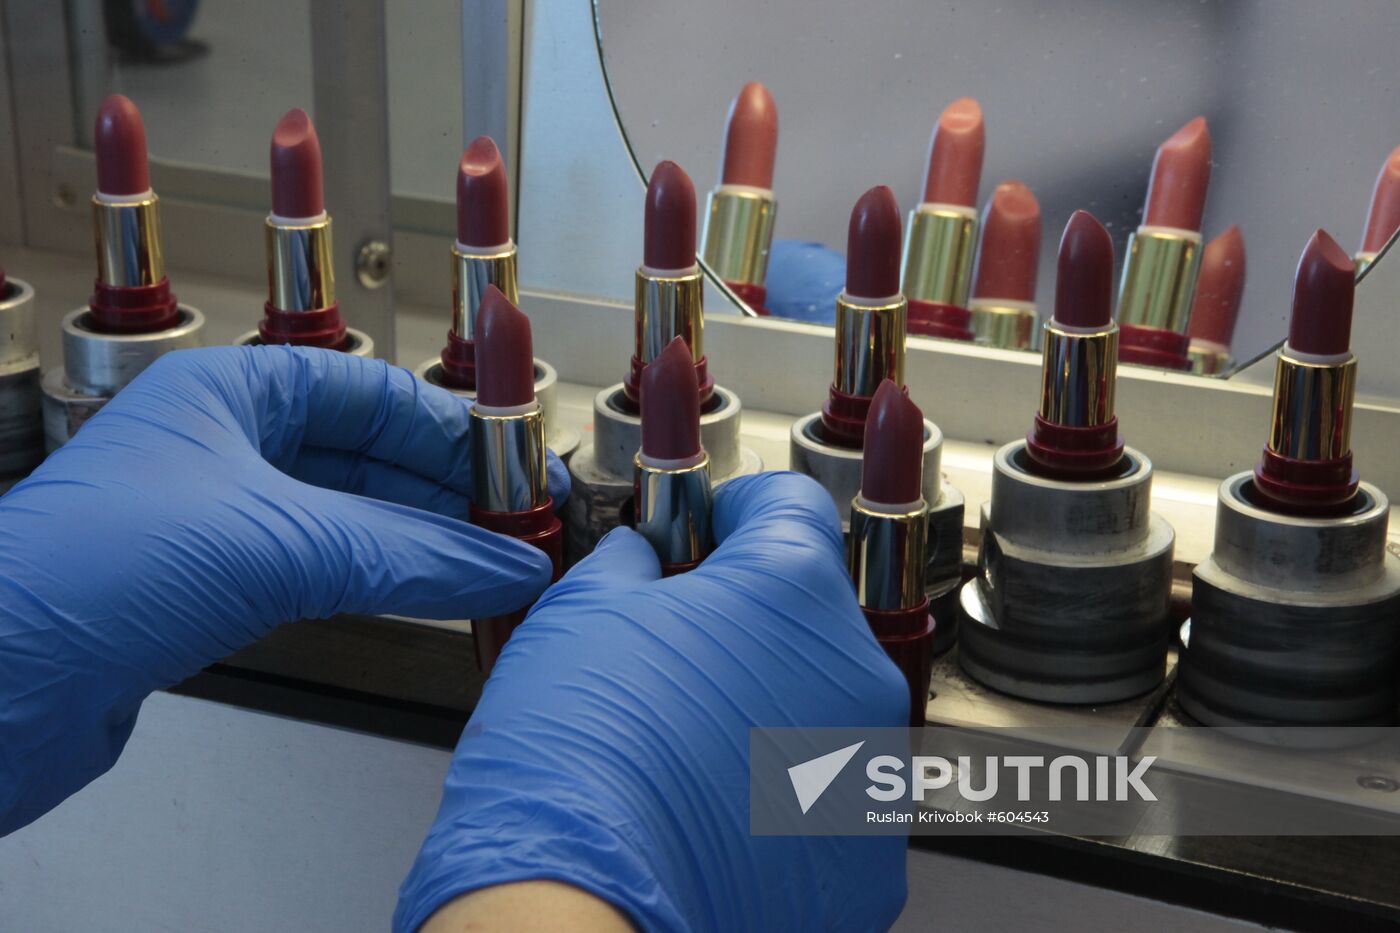 Producing lipstick in Oriflame factory